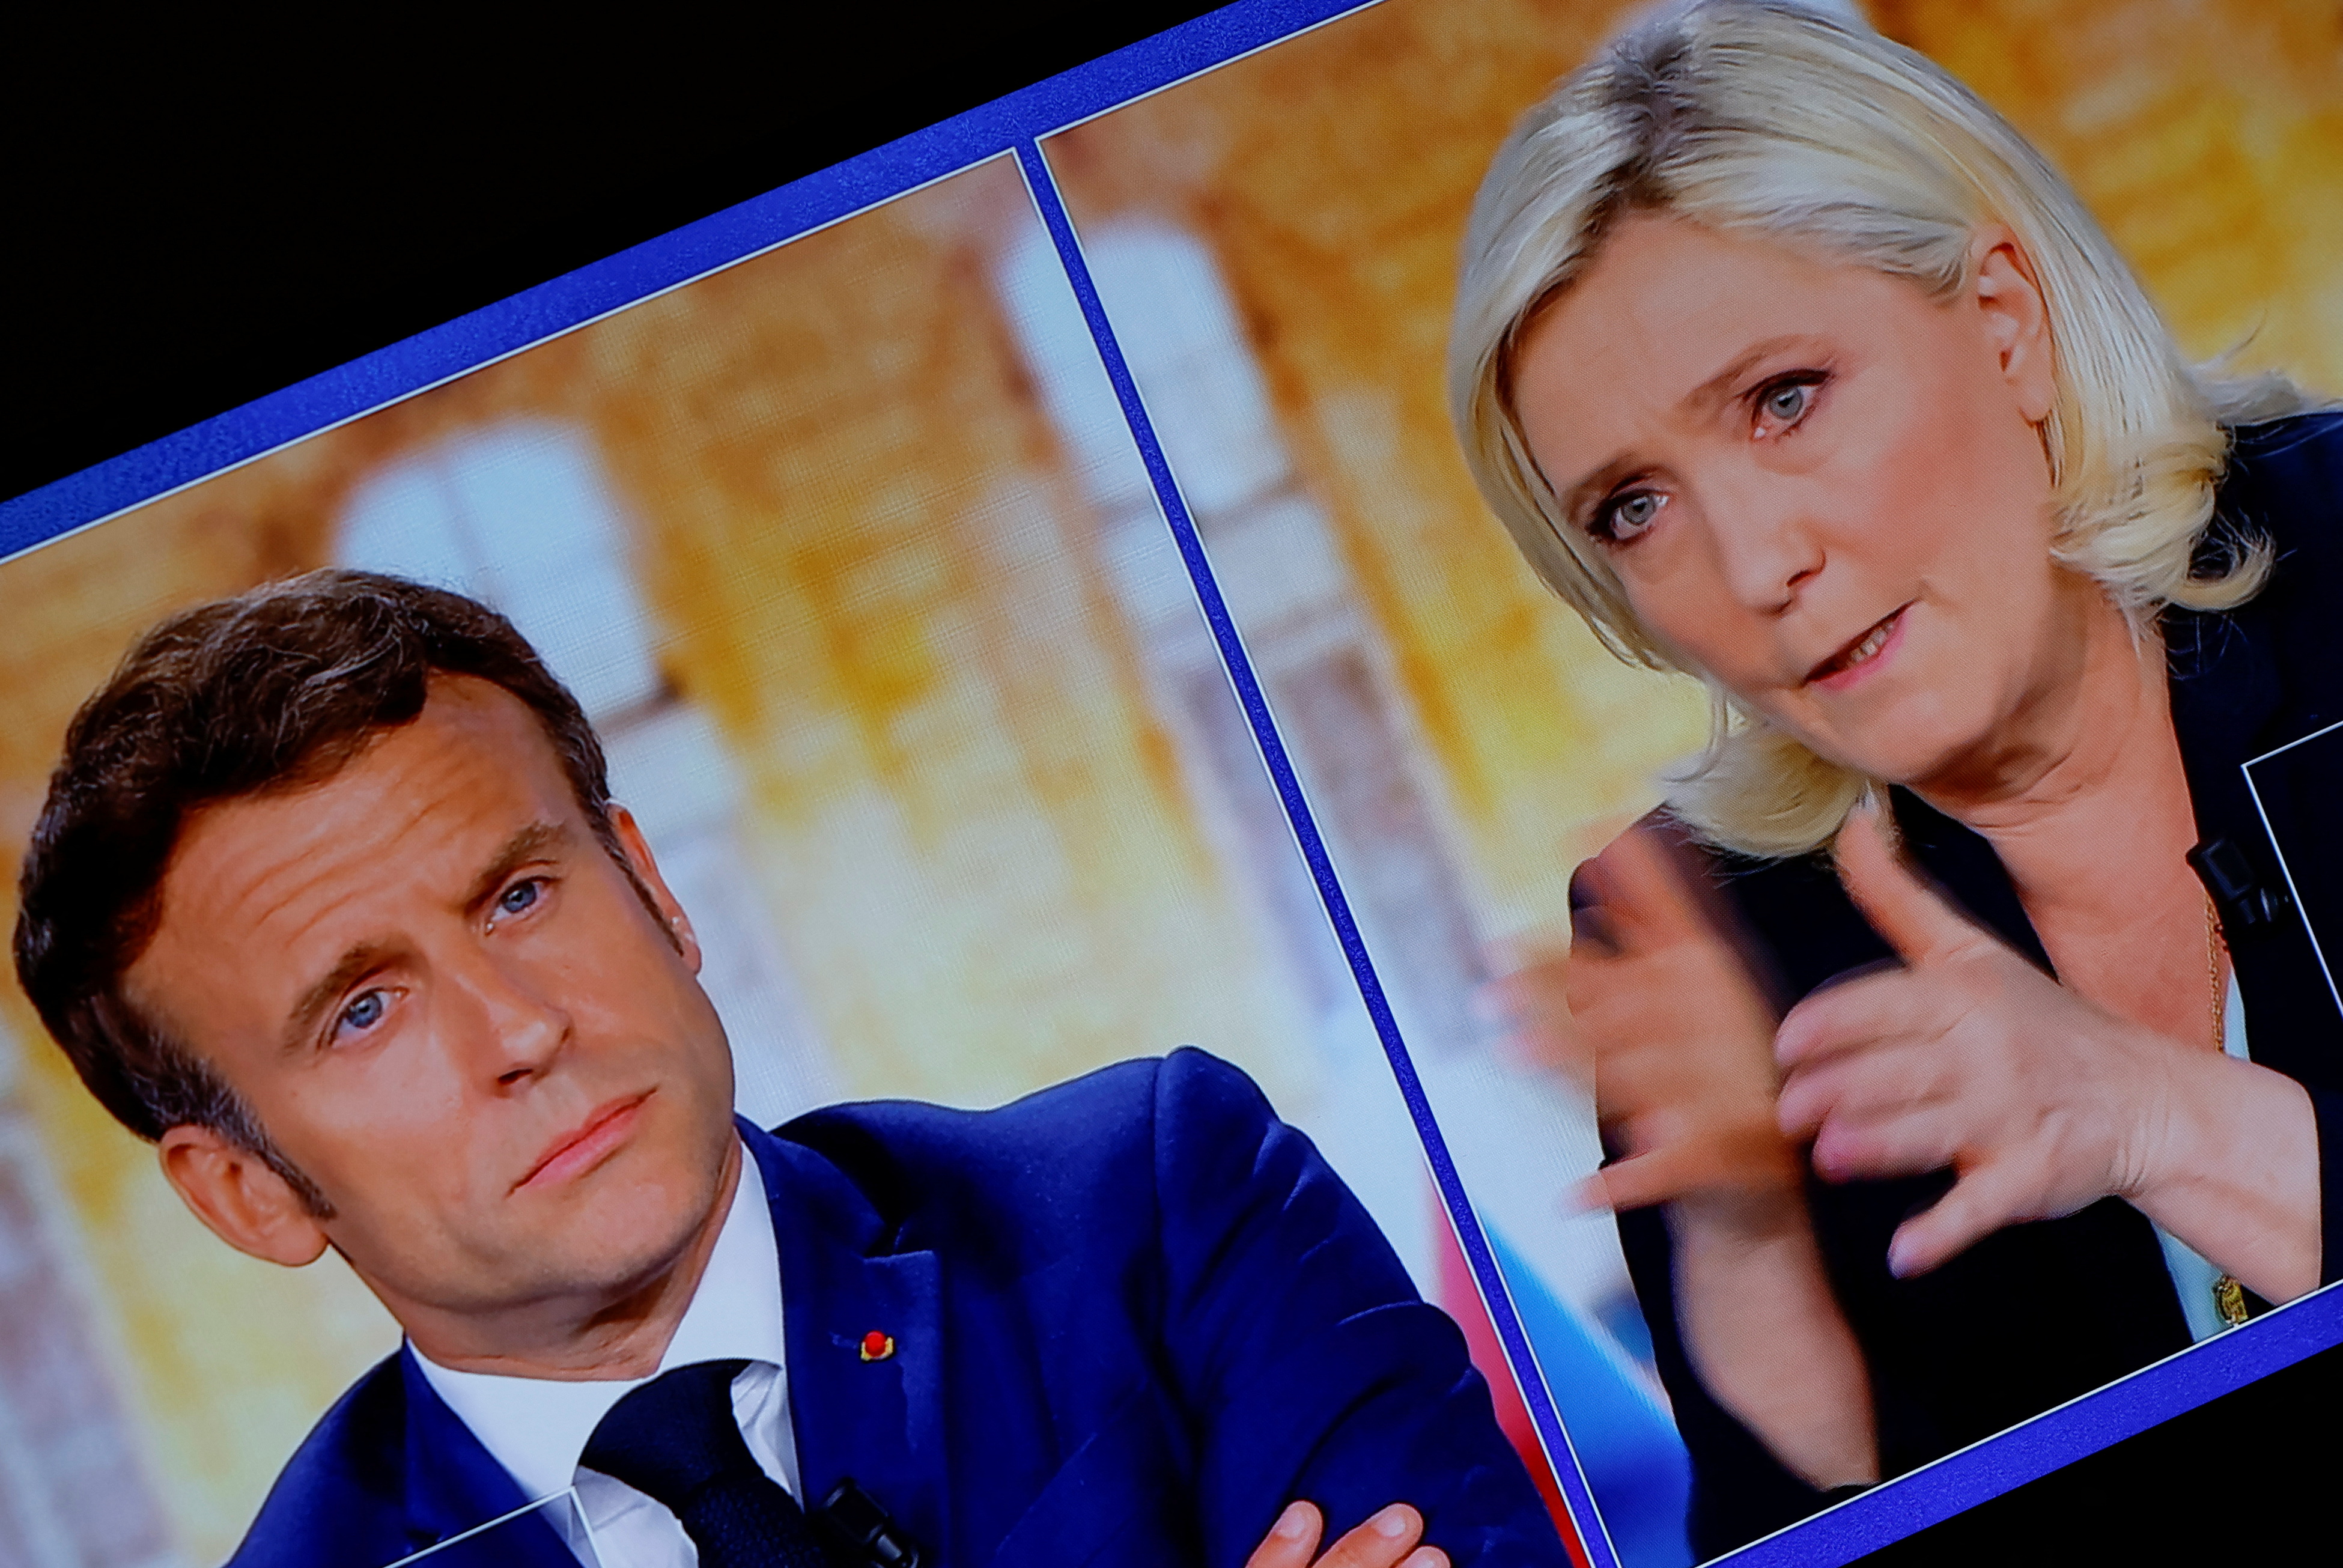 Macron more convincing than Le Pen in French election debate - poll |  Reuters